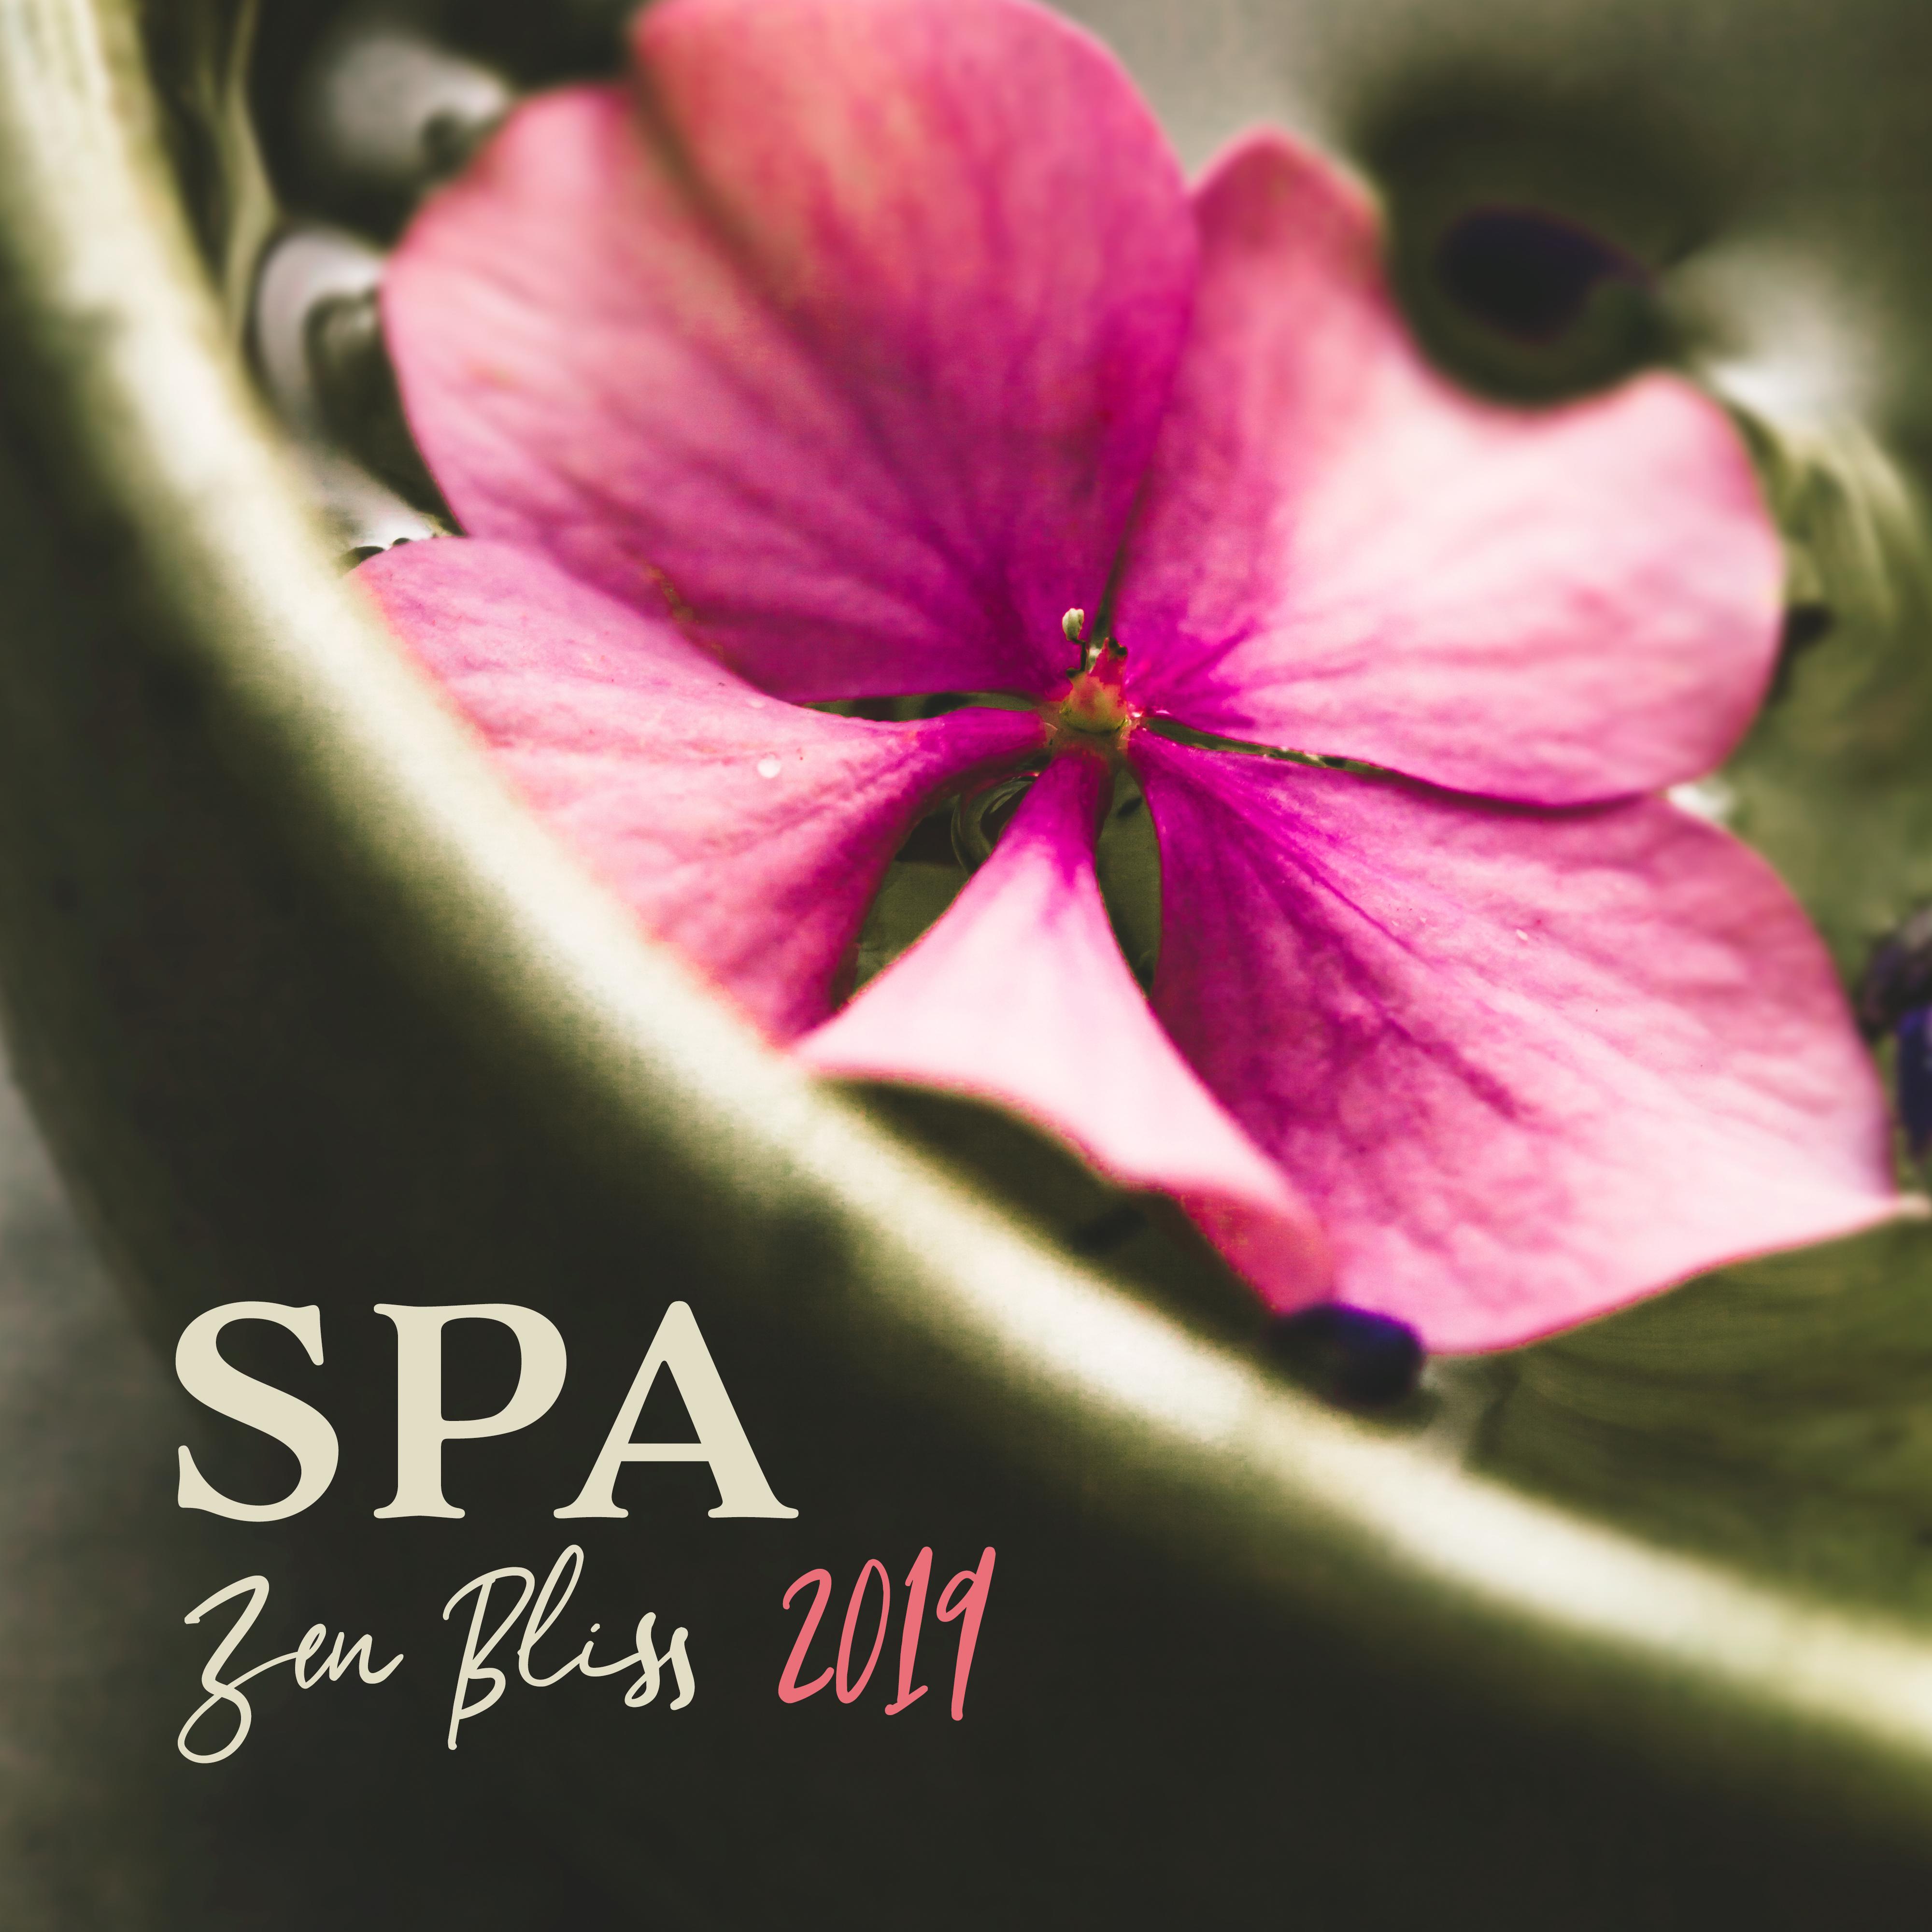 Spa Zen Bliss 2019: 15 New Age Smooth Songs for Perfect Spa Experience, Wellness, Sauna & Massage Background